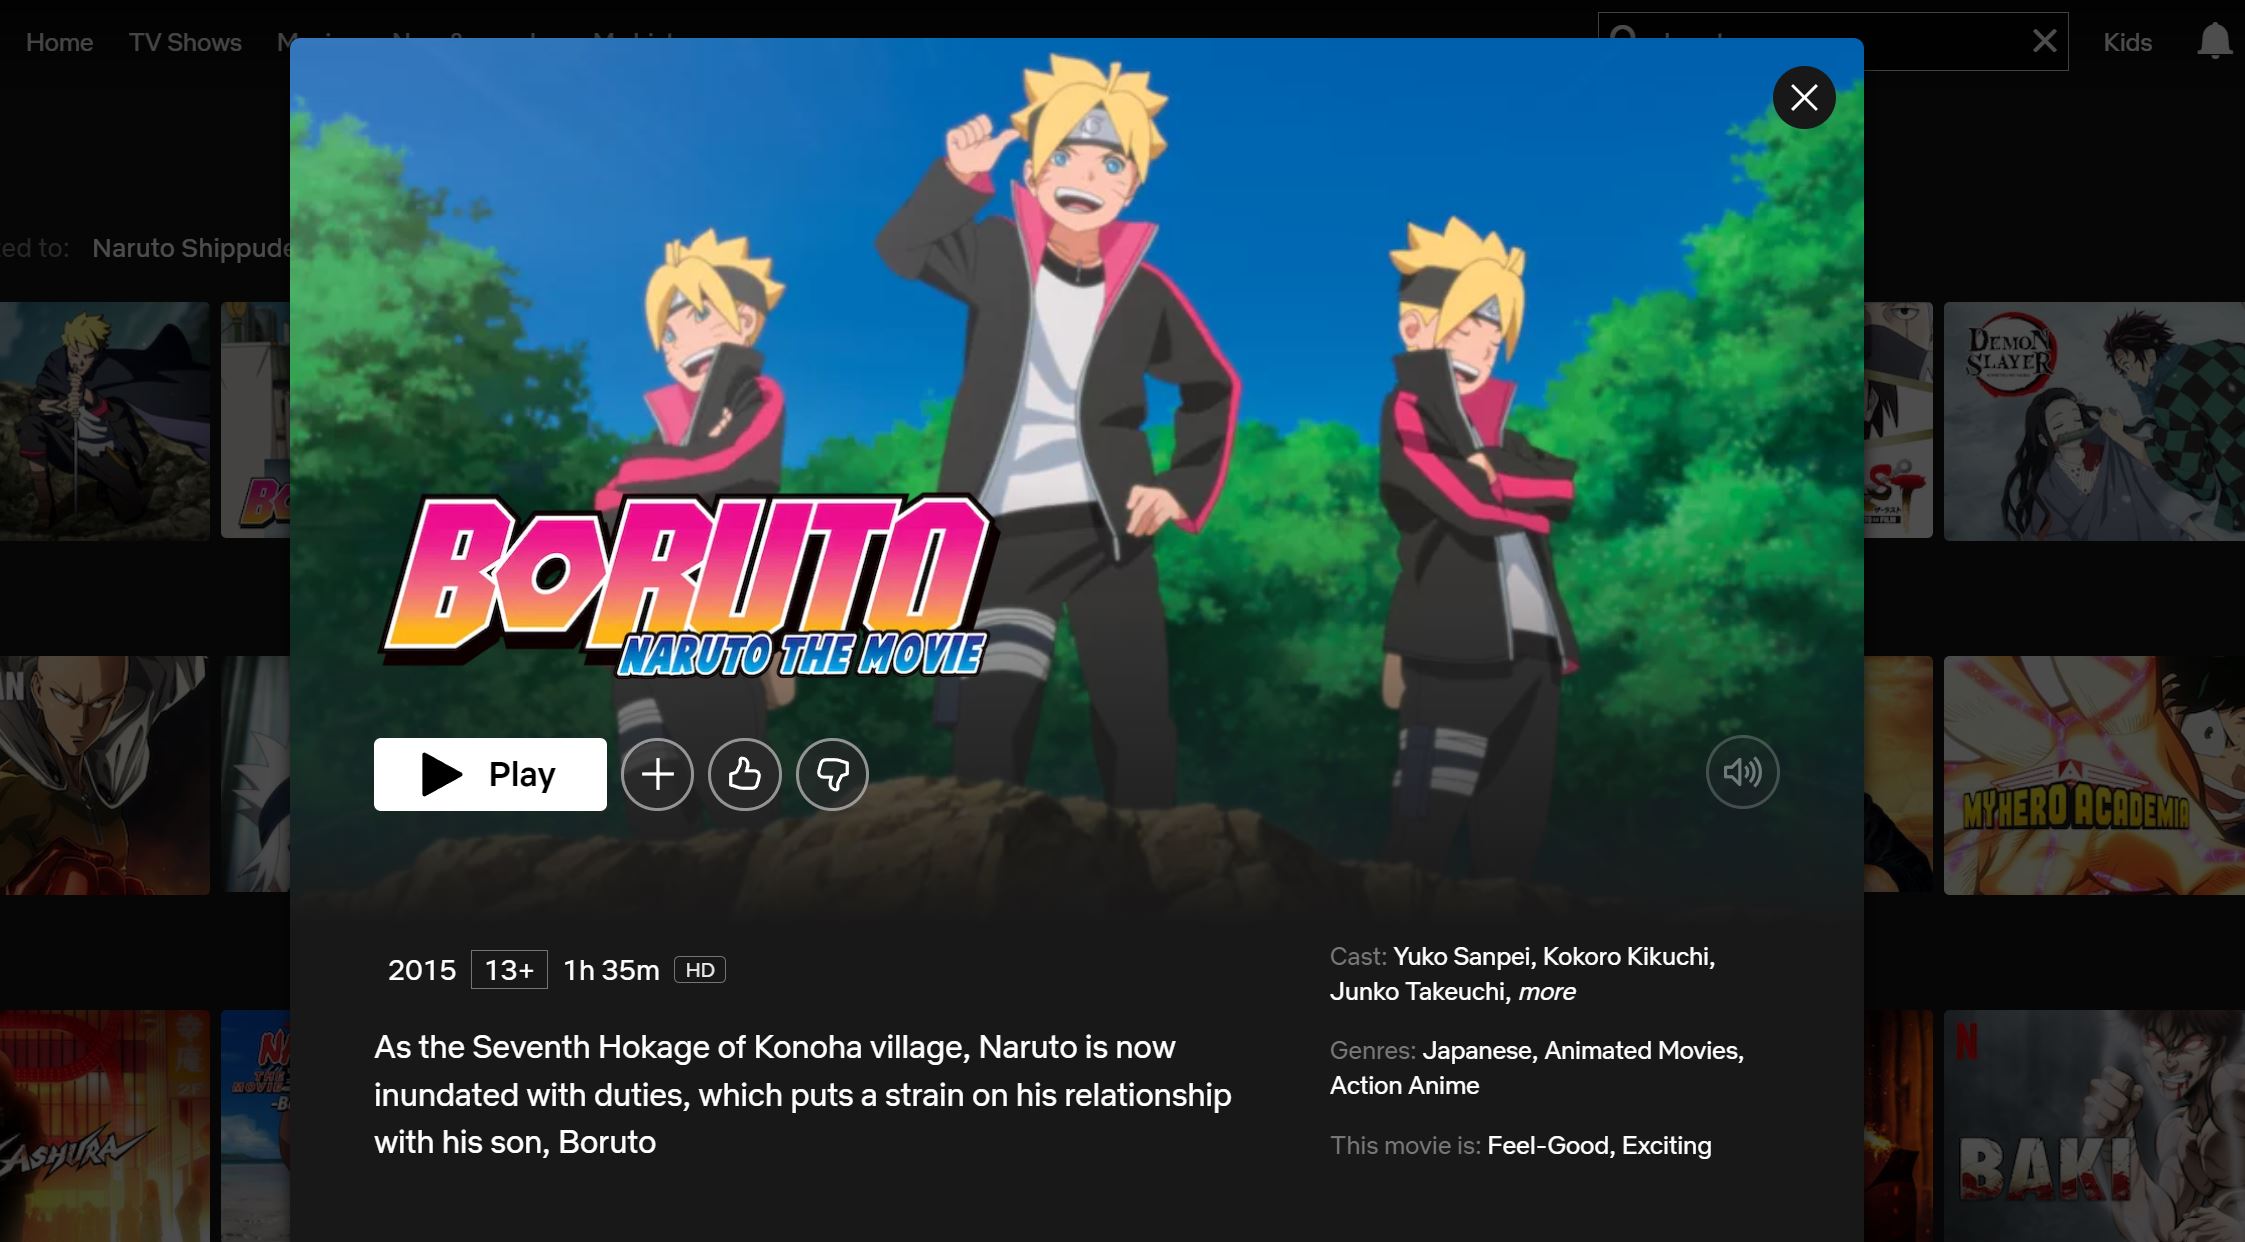 How to Watch Boruto: Naruto Next Generations on Netflix in 2023